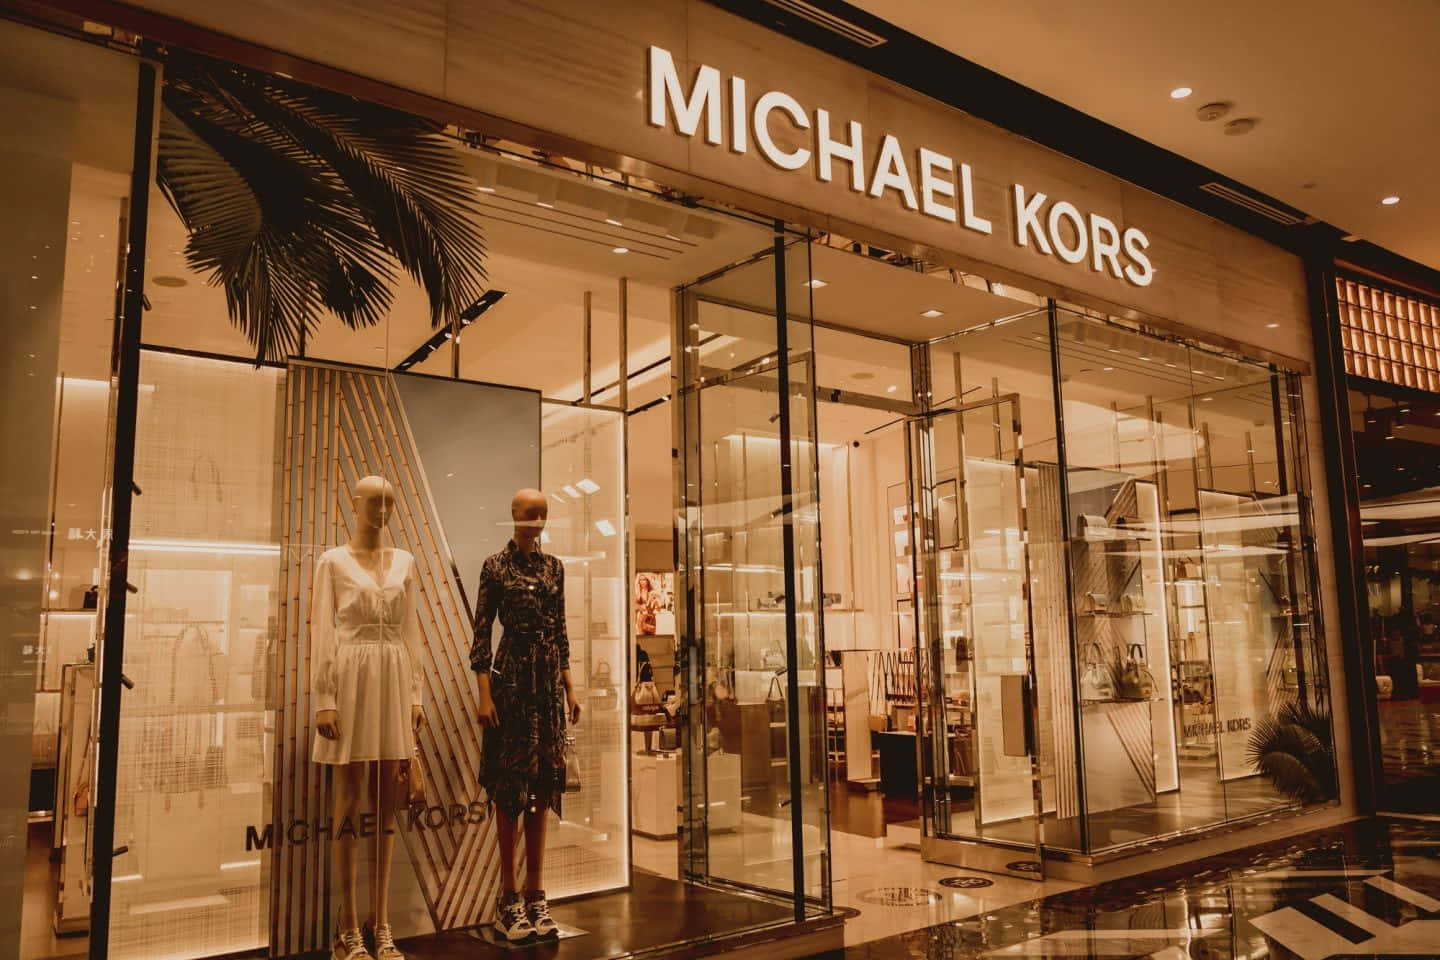 Look stylish with the iconic Michael Kors brand